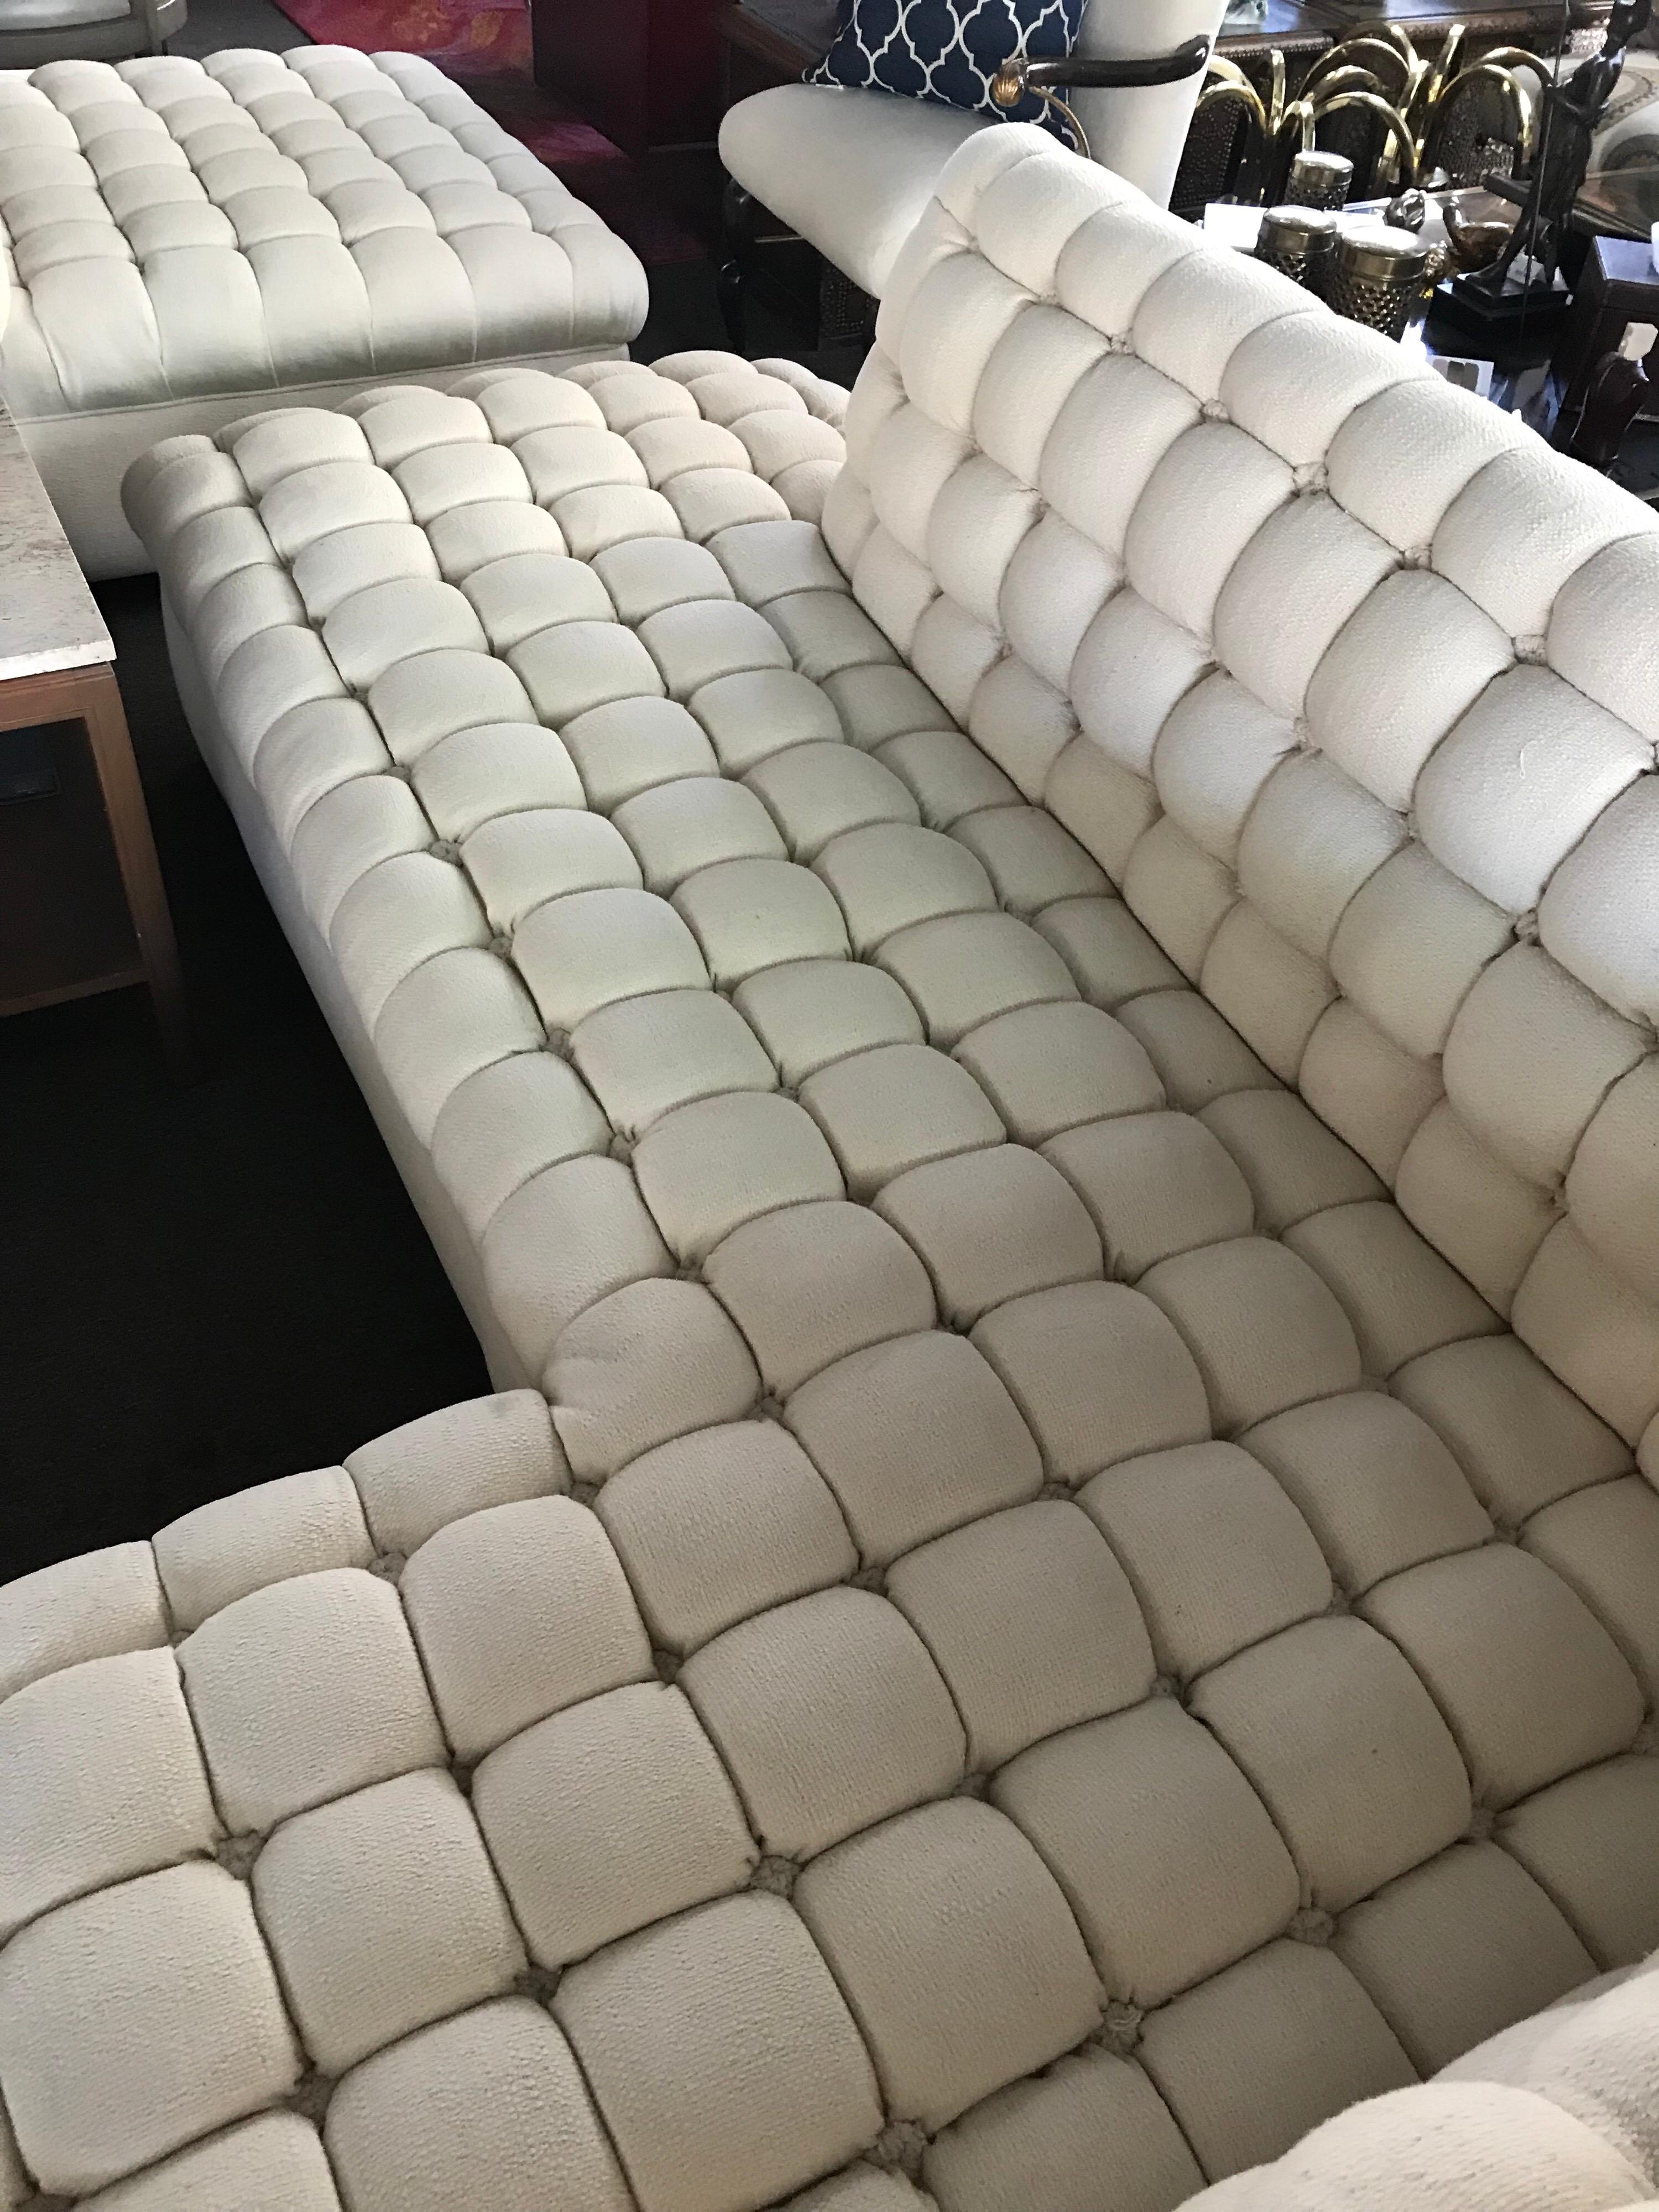 Steve Chase is one of the most influential designers of all time. He among other things, was known for his iconic upholstered pieces including sofas, beds and chairs. On the top of the list, are the tufted pieces such as this one. This spectacular L